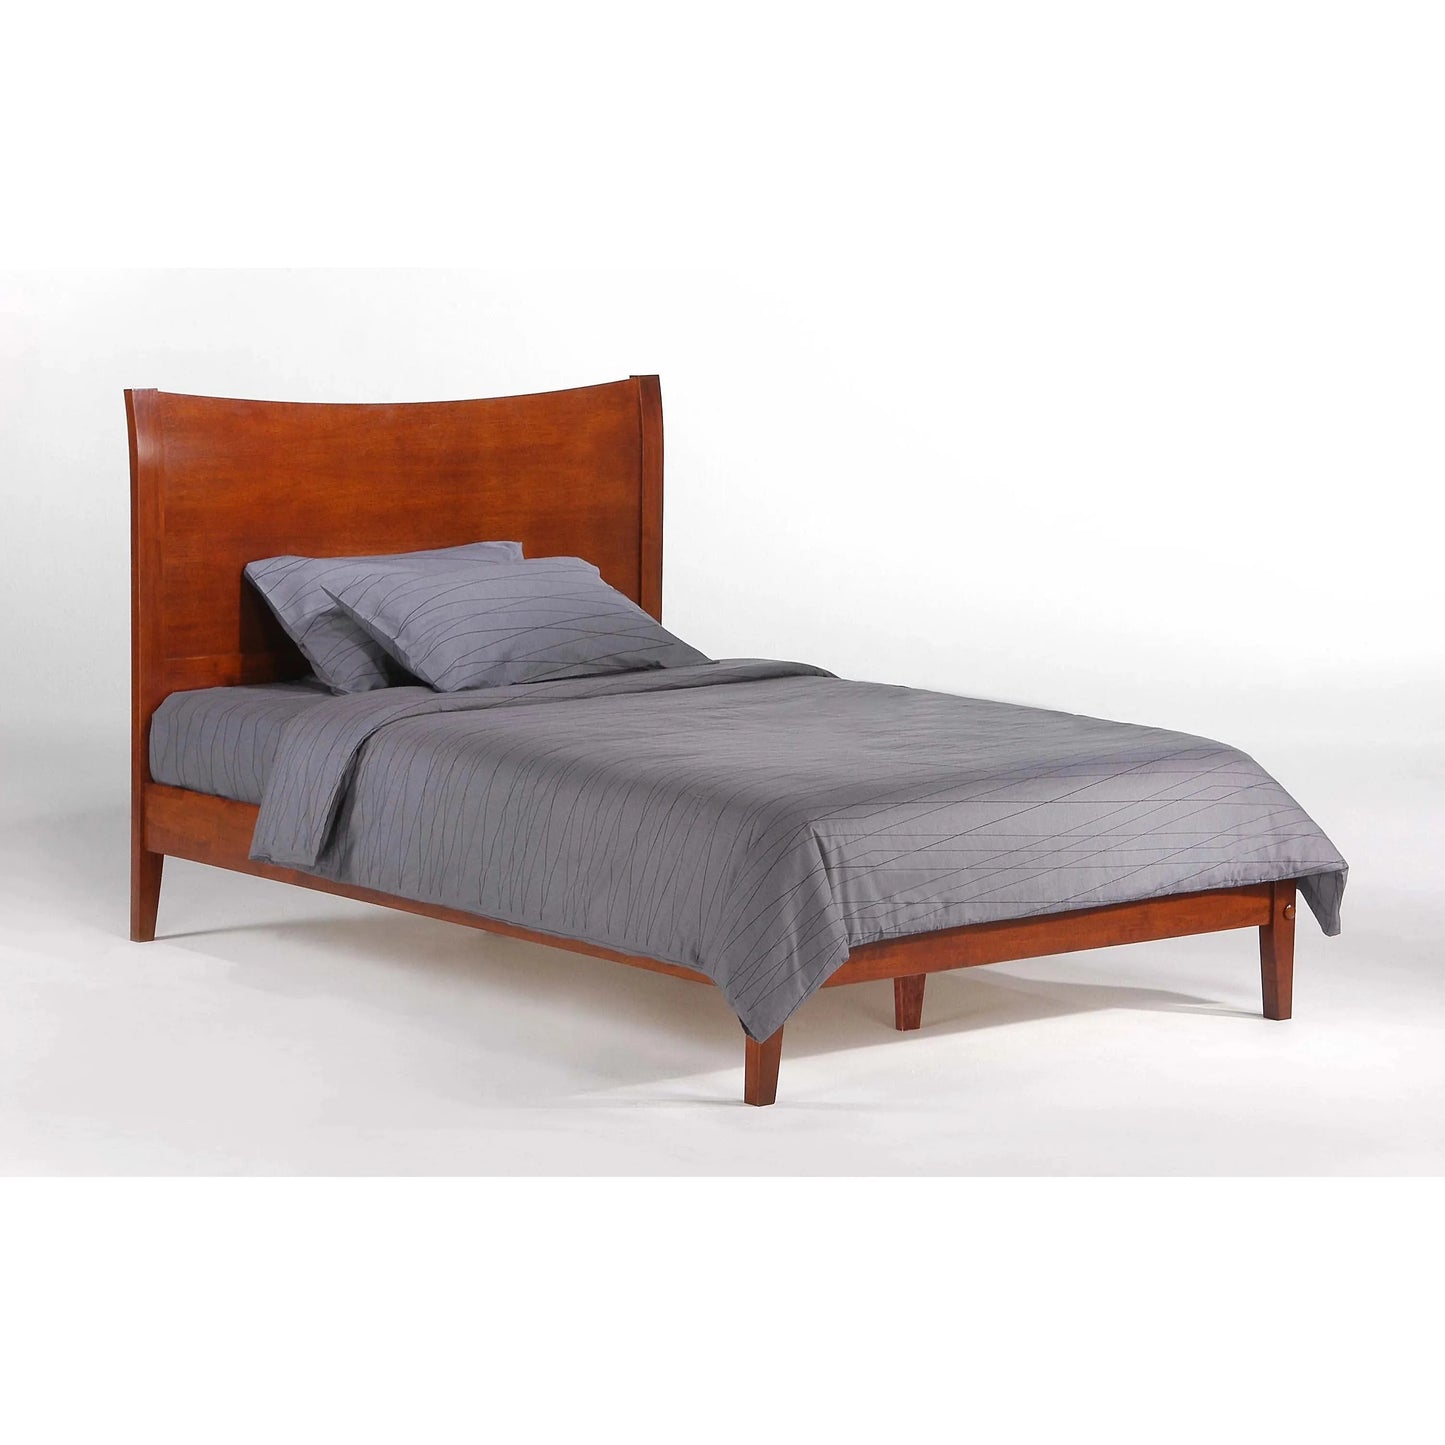 Night And Day Blackpepper Full Bed in cherry finish (P Series) Cherry BPE-PH-FUL-COM-P-CH